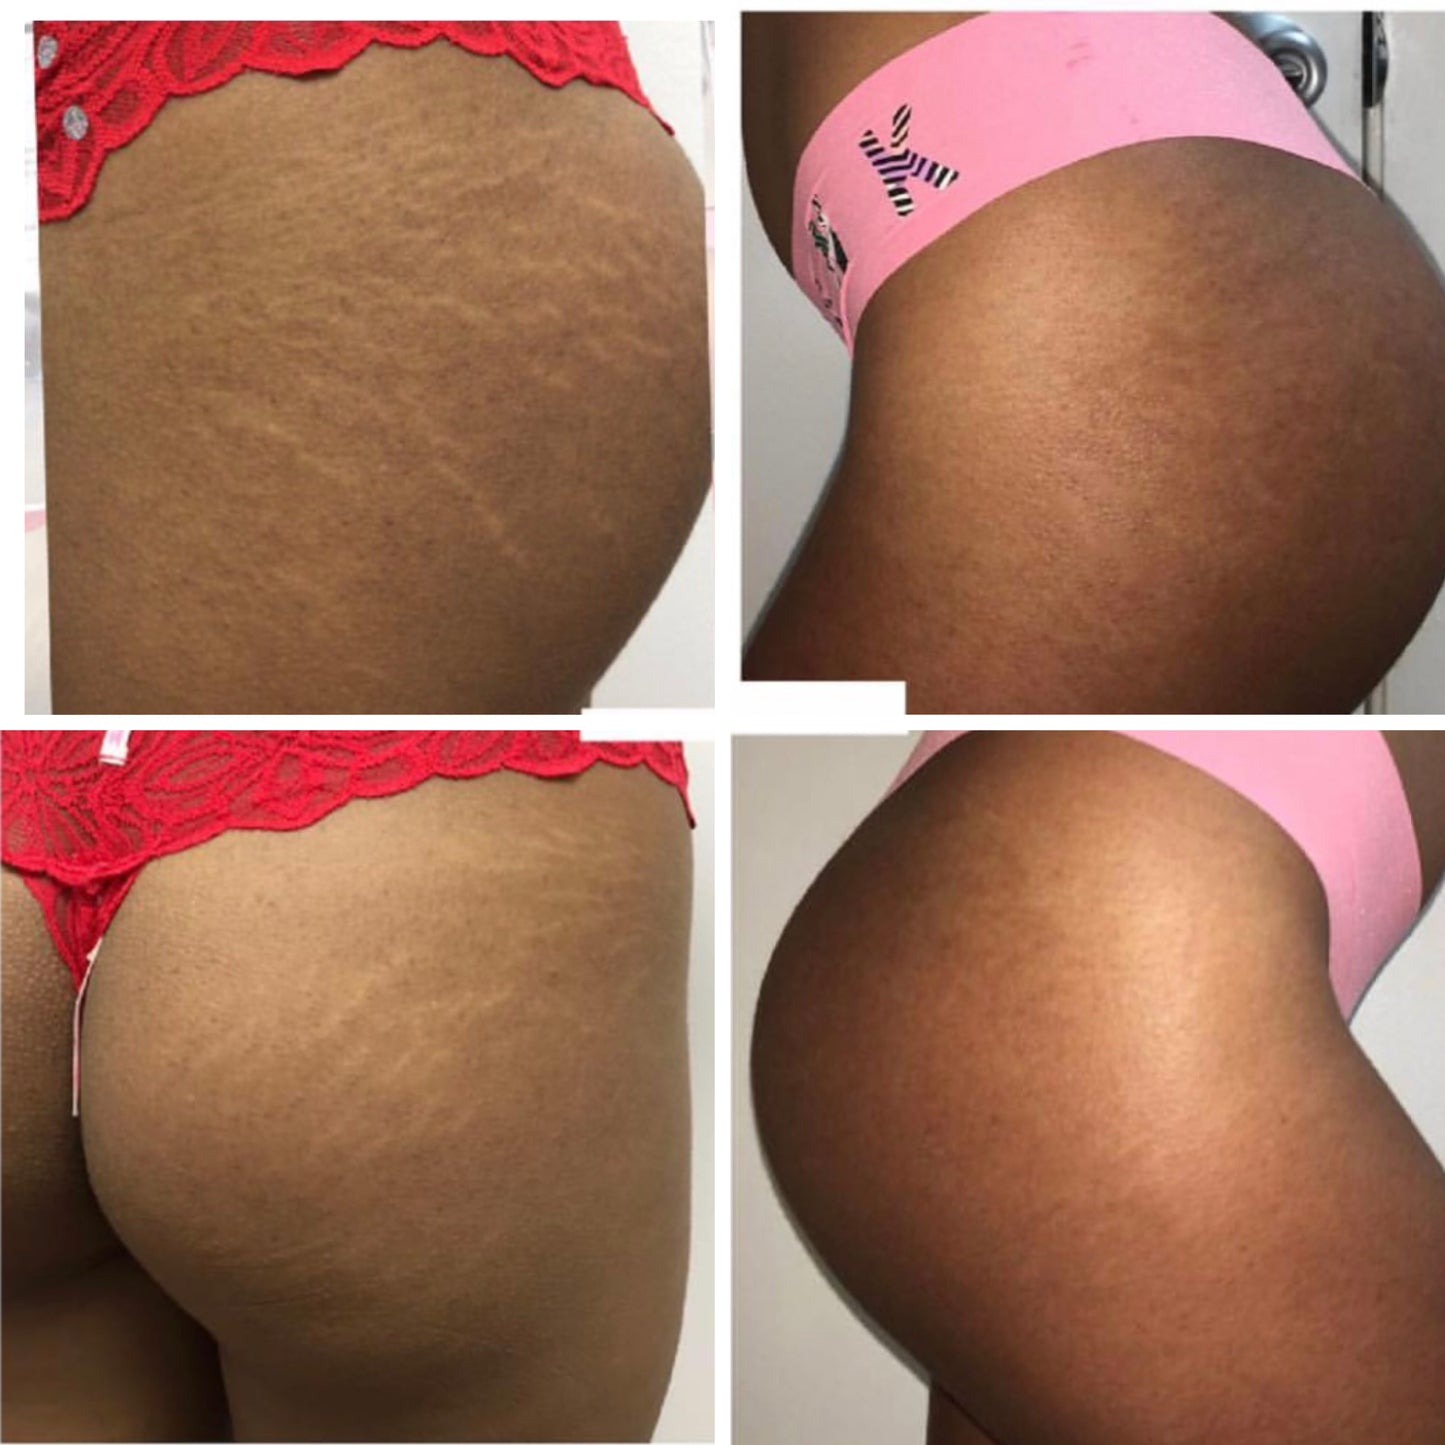 Cellulite & Stretch Mark Removal Double Pack!